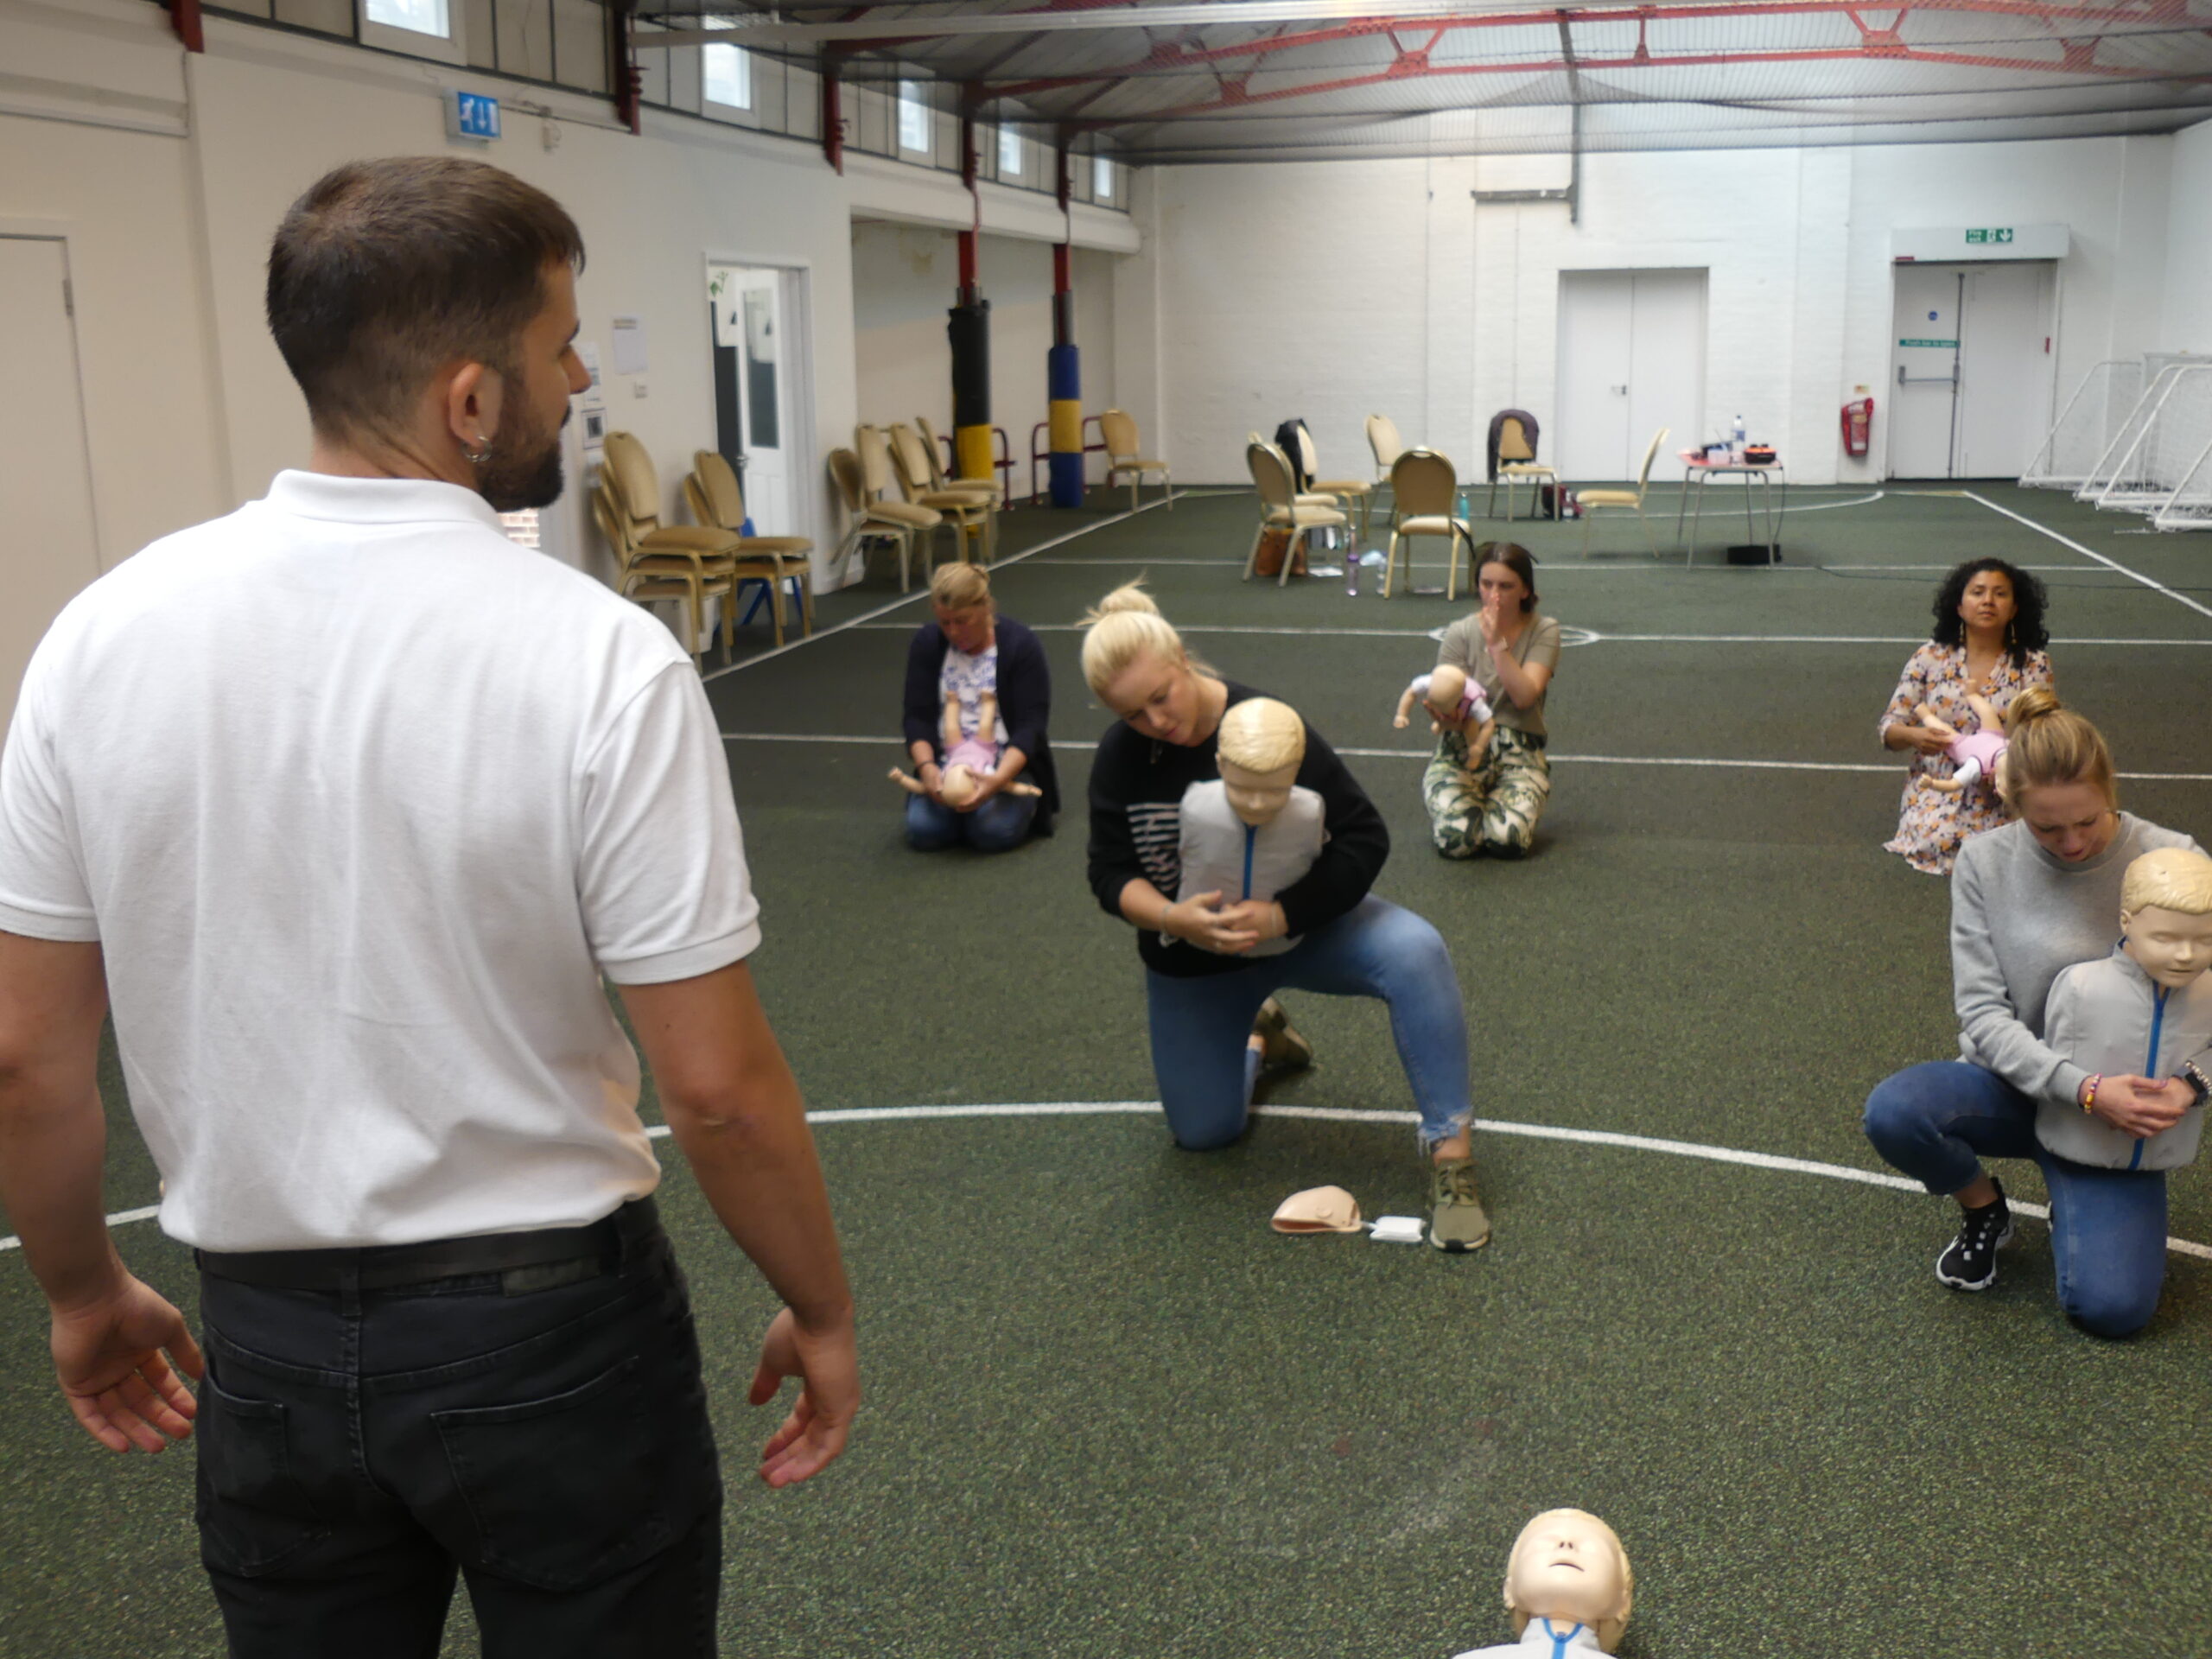 Group practicing choking on a paediatric first aid course